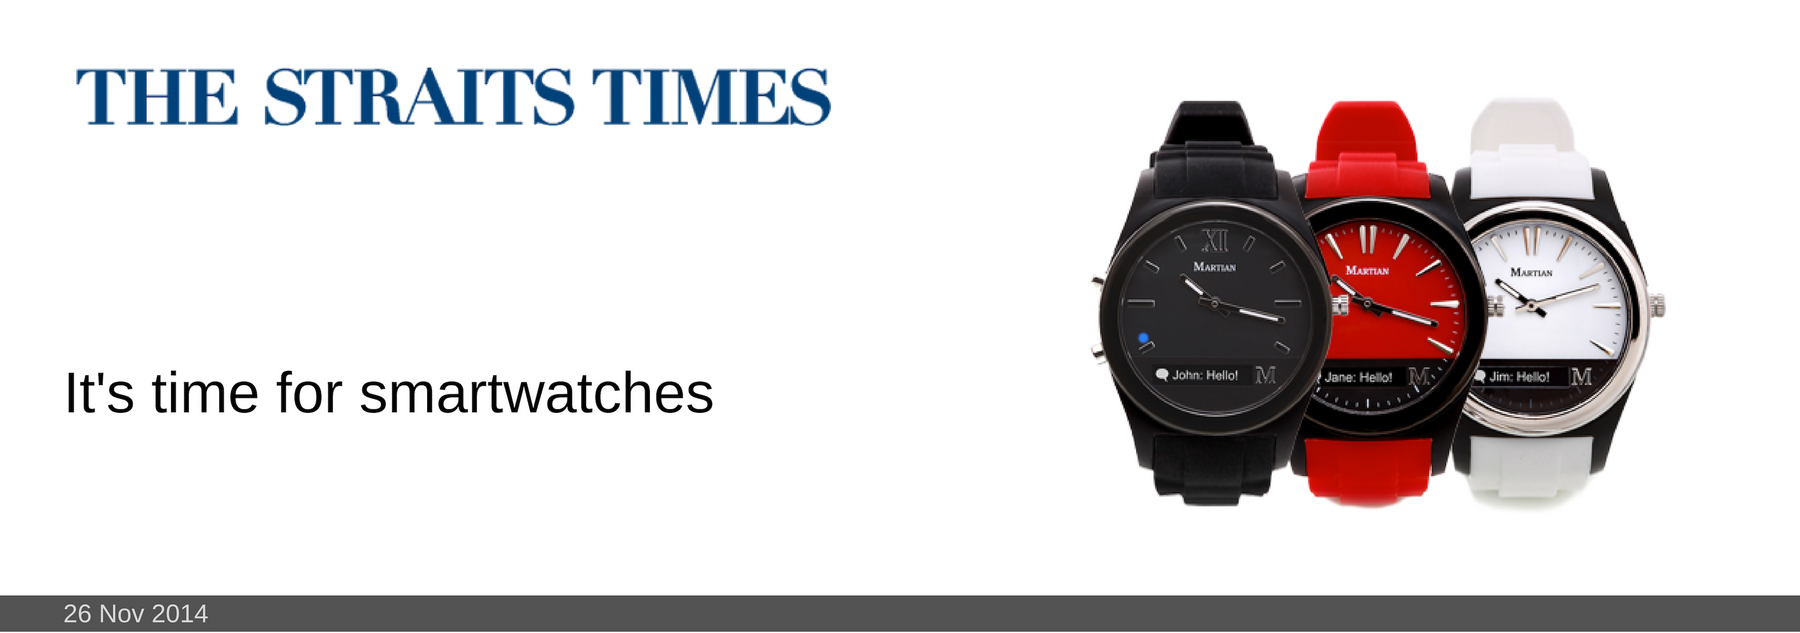 26 NOV 2014: It's time for smartwatches